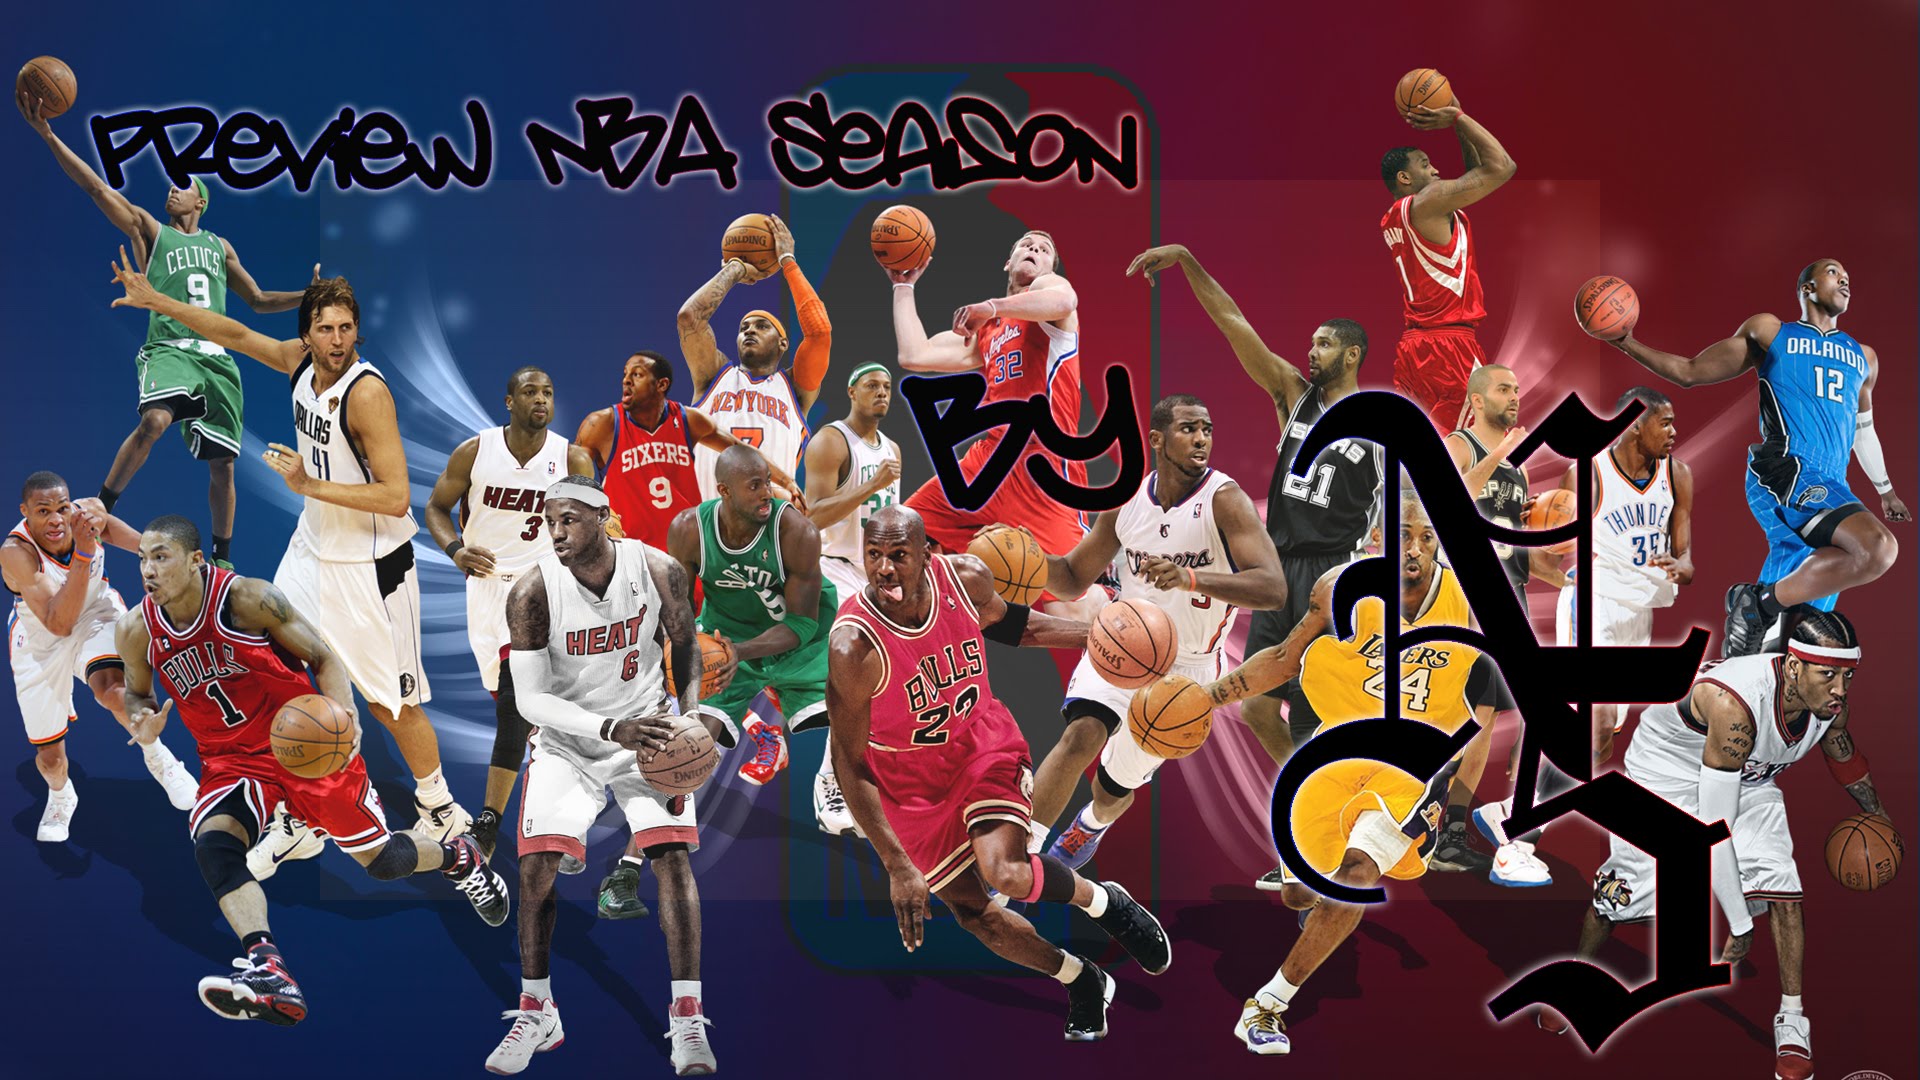 Free Download Mes Preview Nba Saison 14 15 Western Conference 6eme 19x1080 For Your Desktop Mobile Tablet Explore 43 Nba Wallpapers 14 15 Nba Wallpaper For Computer Nba Live Wallpaper Nba Finals 15 Wallpaper